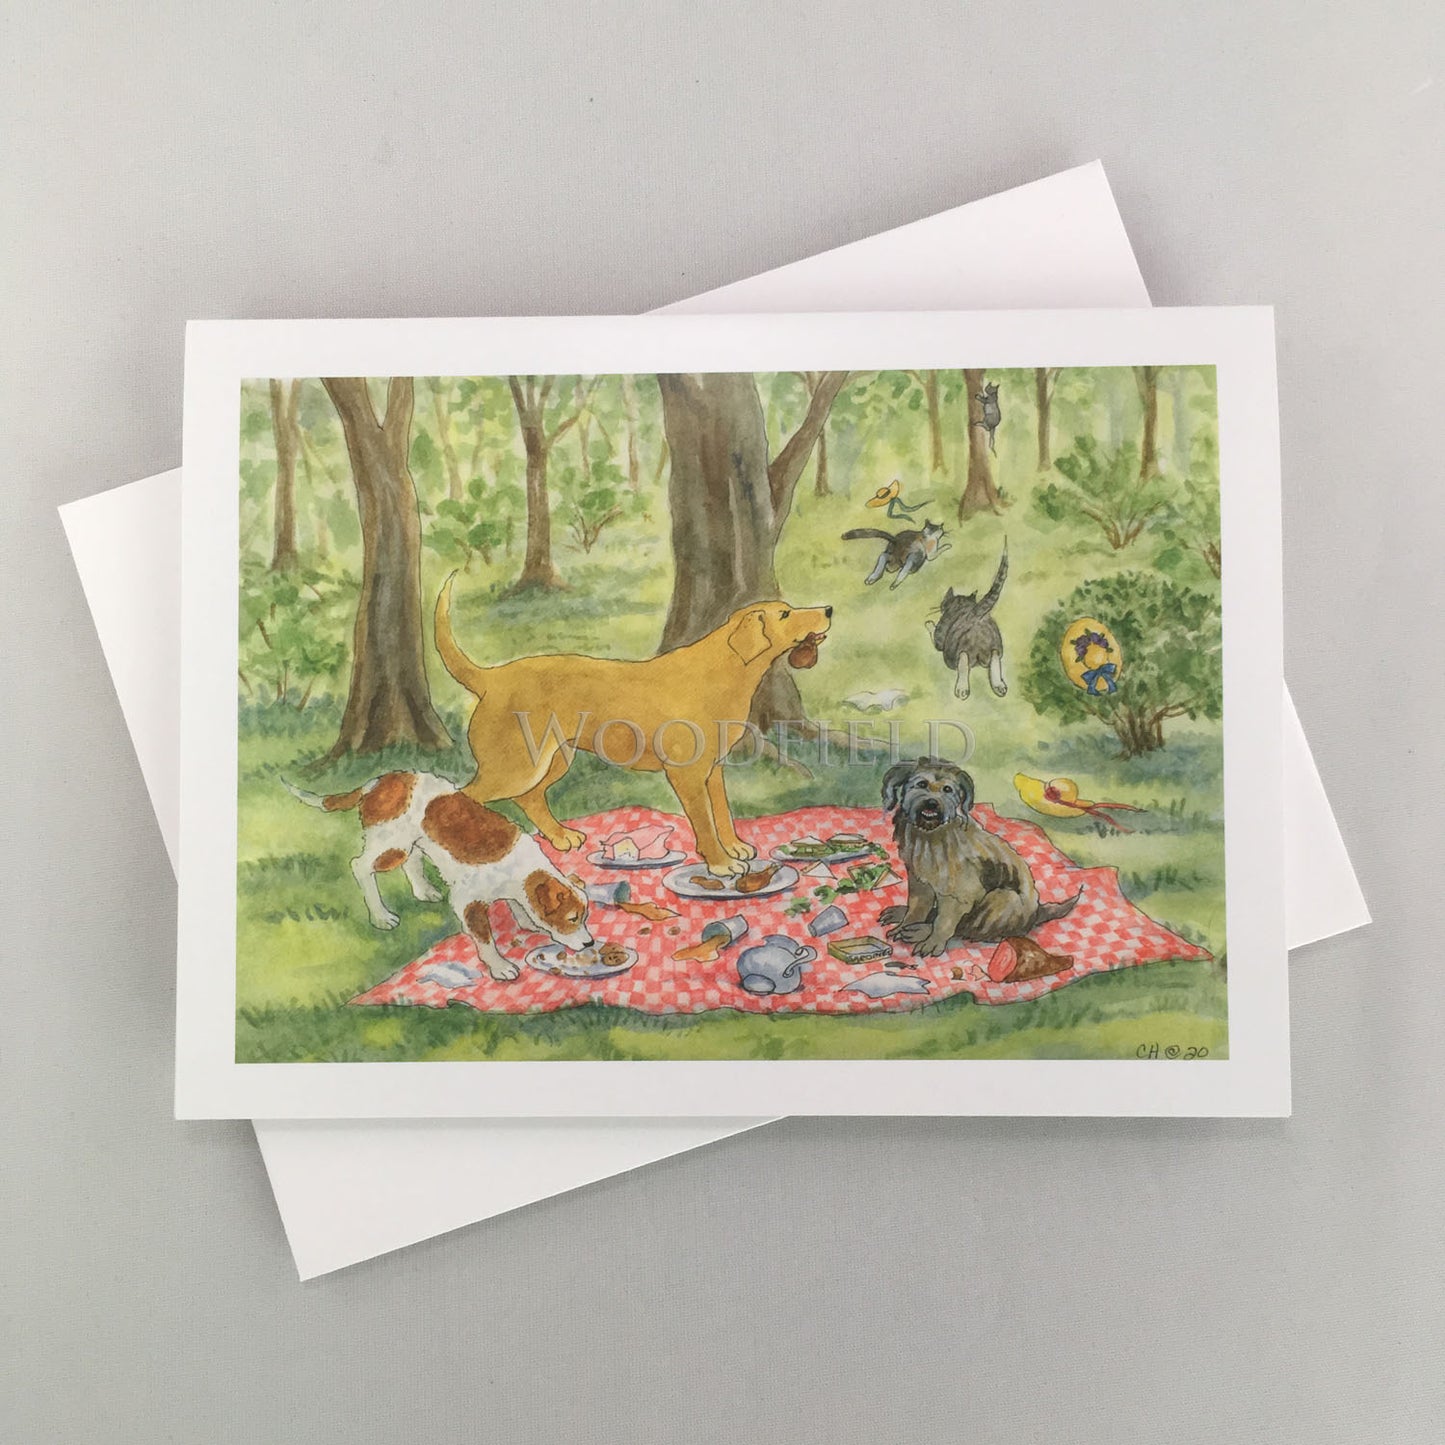 Bad Dog Picnic - Greeting Card by Woodfield Press